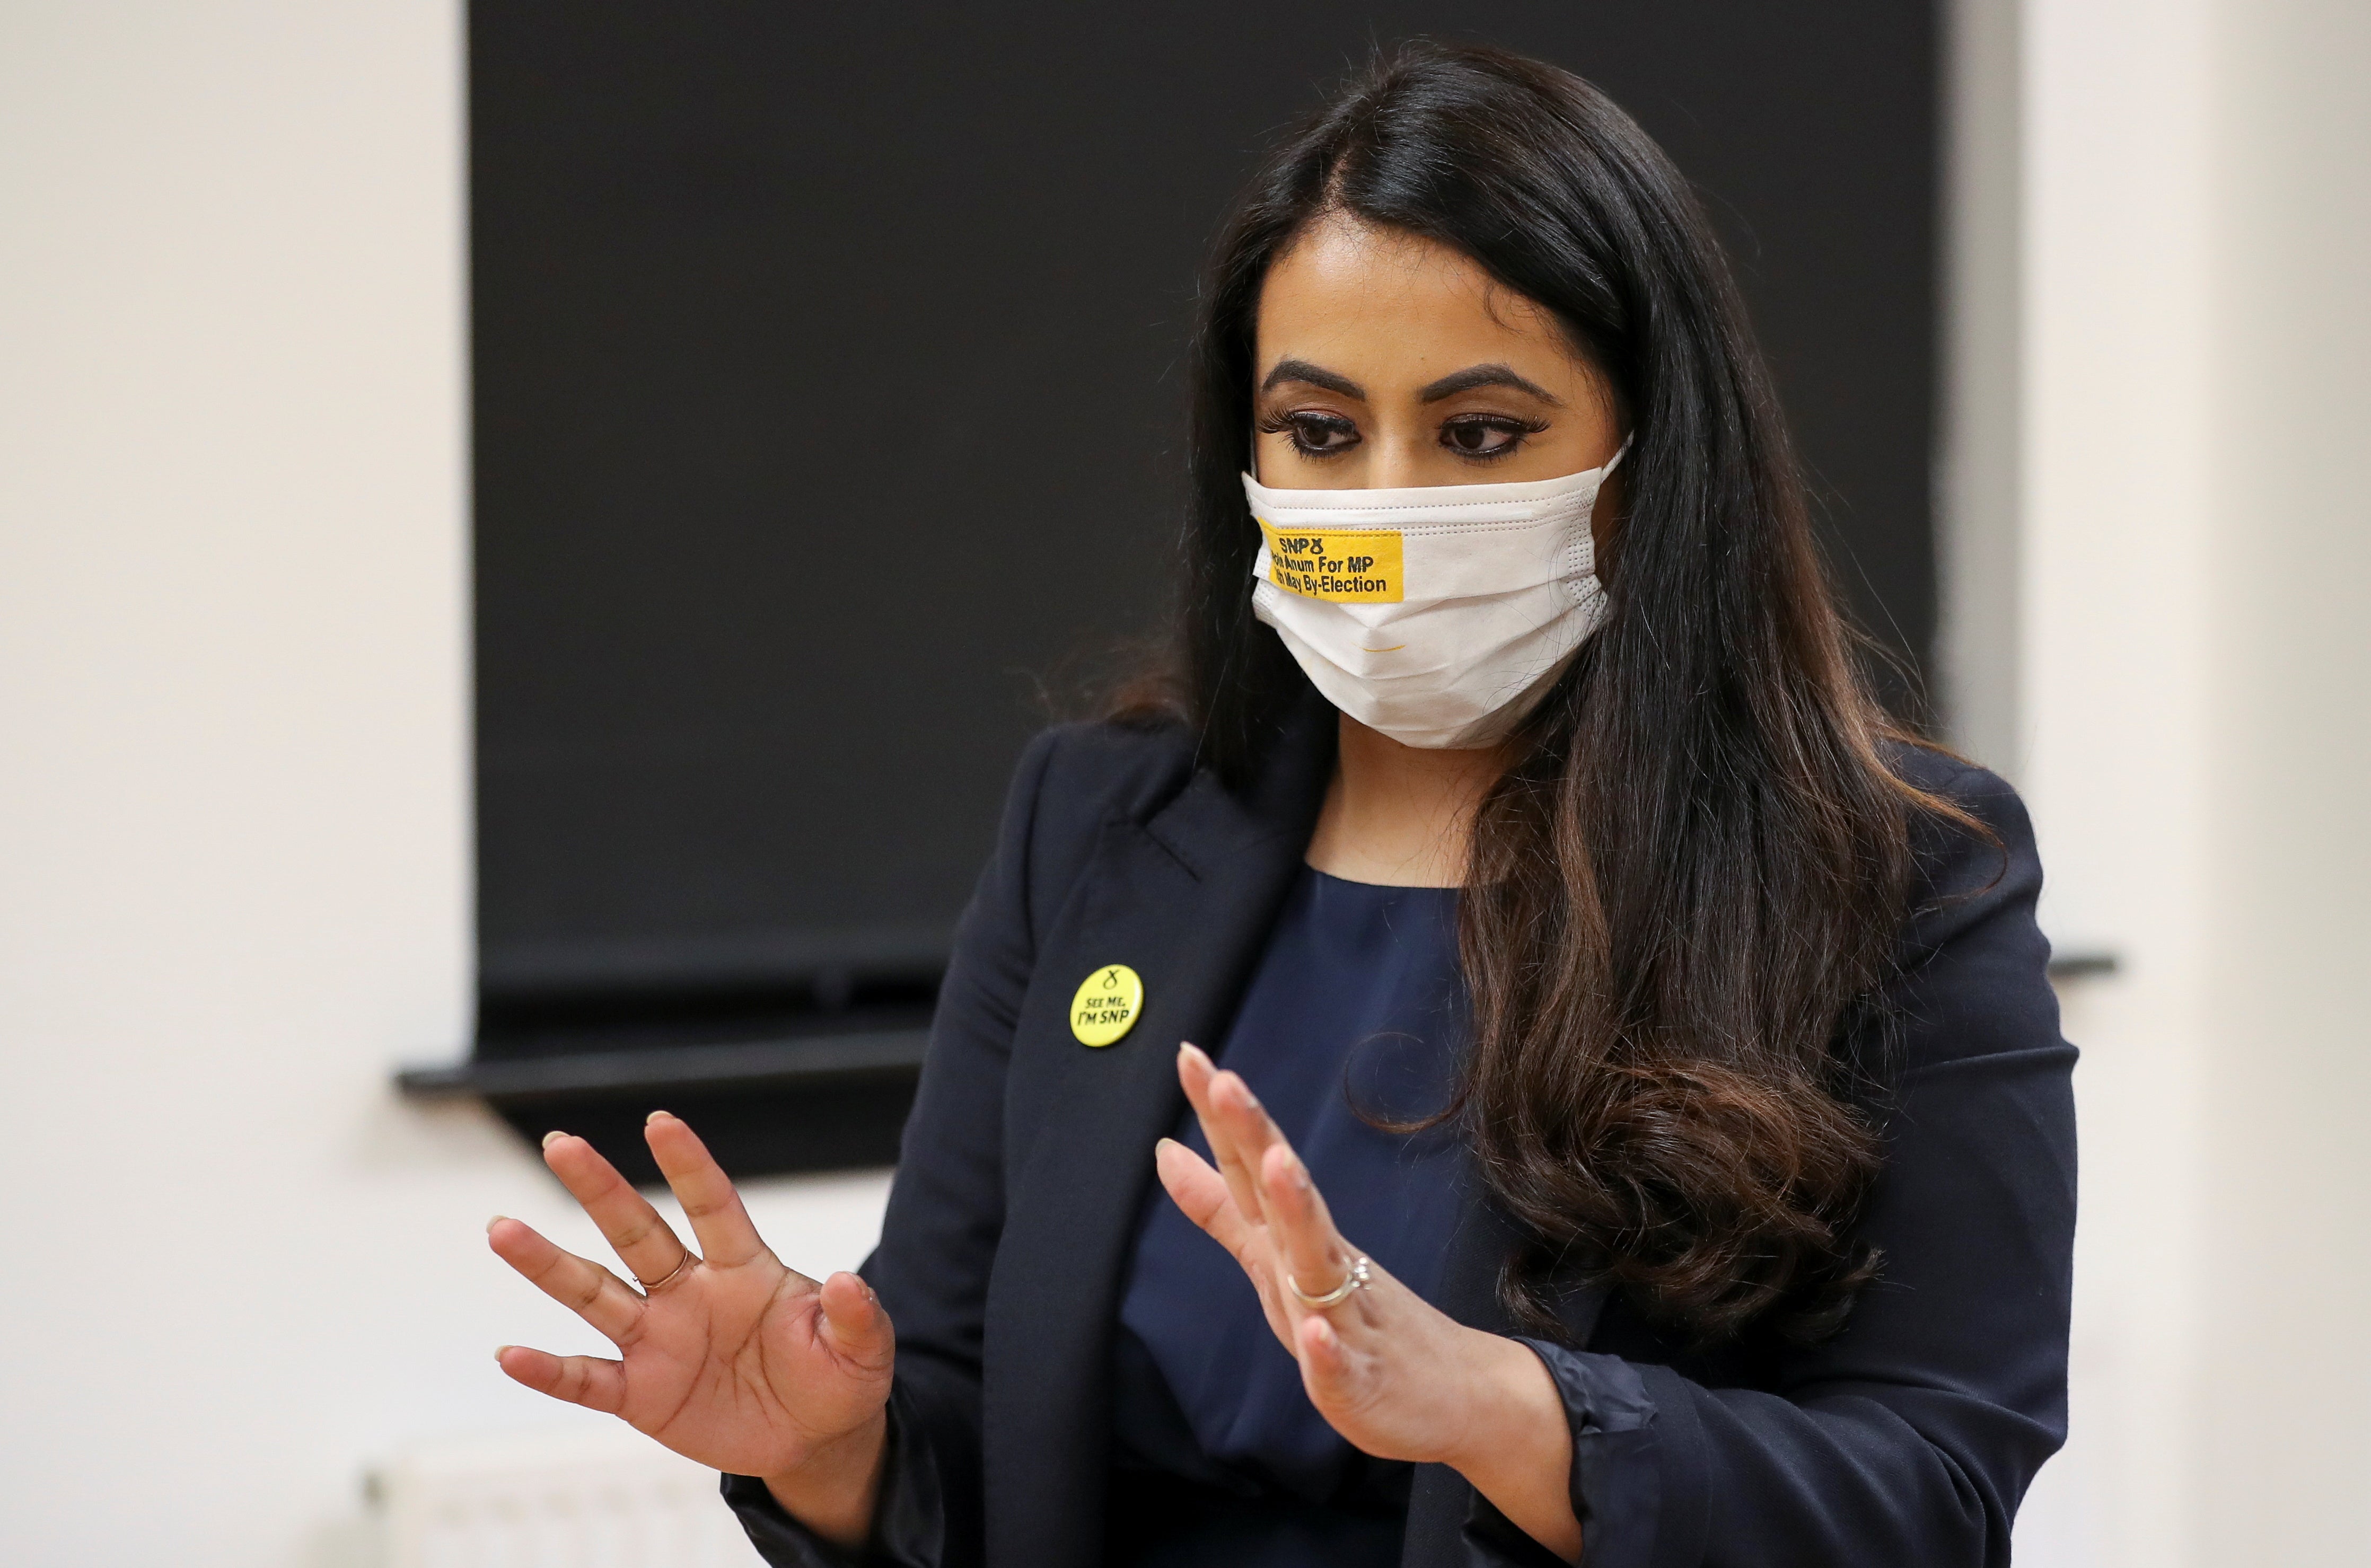 Airdrie and Shotts SNP MP Anum Qaisar said she was warned by a former Conservative minister which ‘predatory’ men to avoid in parliament